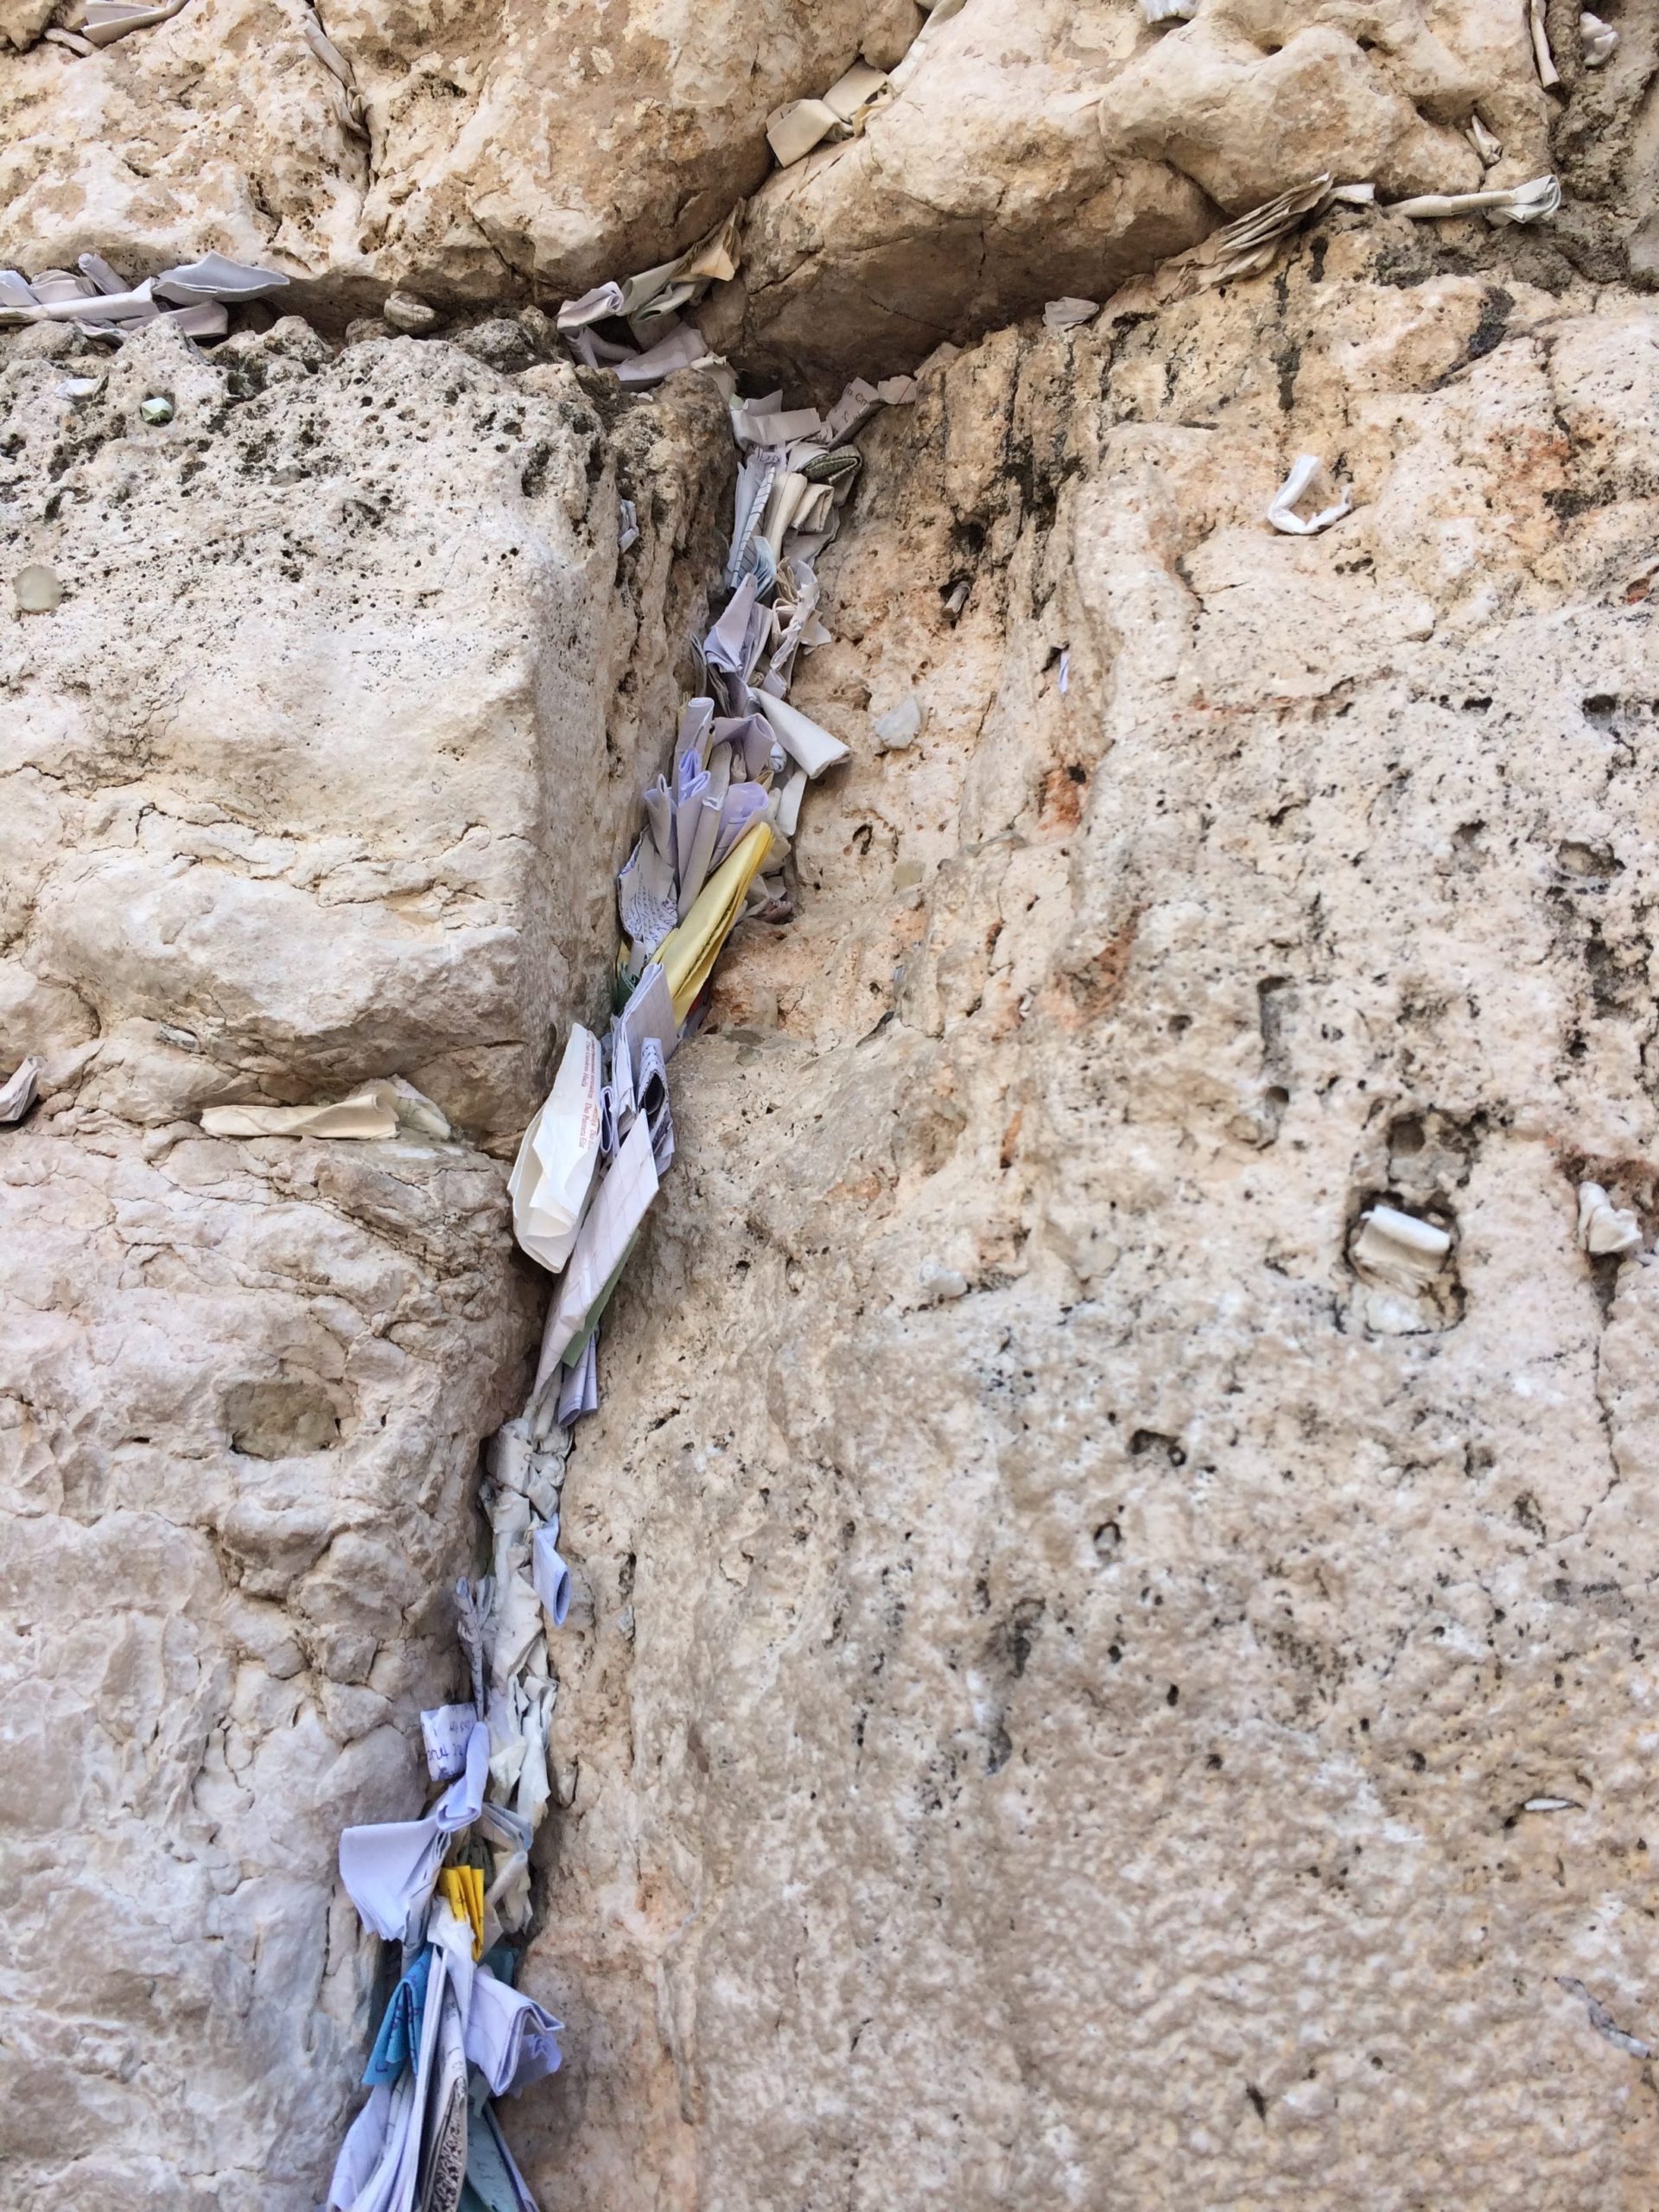 Notes and prayers in Western Wall in Jerusalem